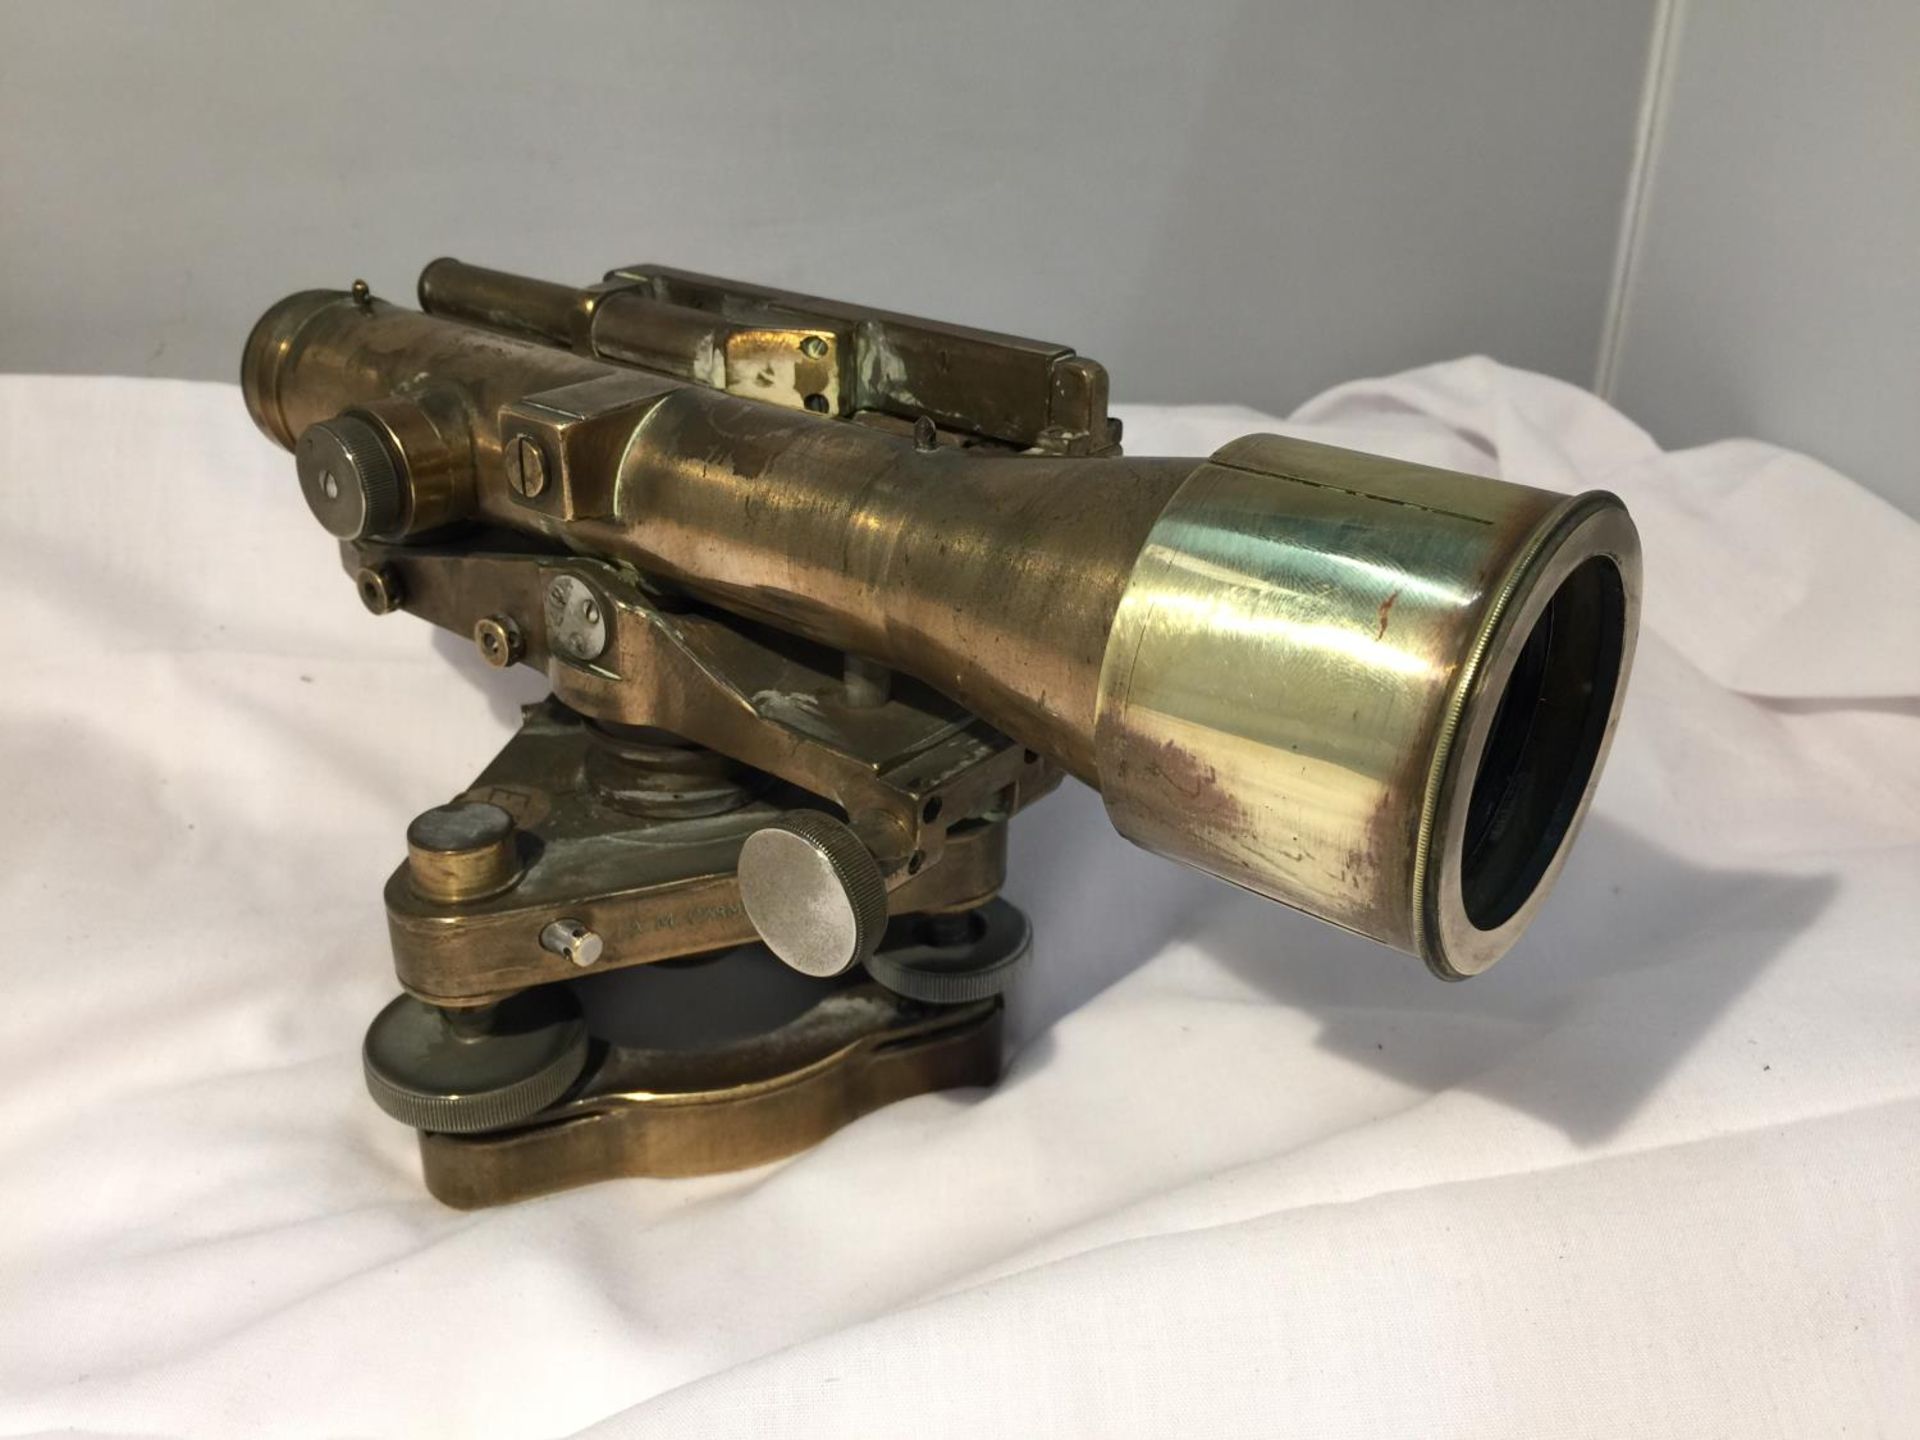 AN EARLY BRASS SURVEYORS LEVEL COOKE TROUGHTON AND SIMMS LTD PATENT NO 242468